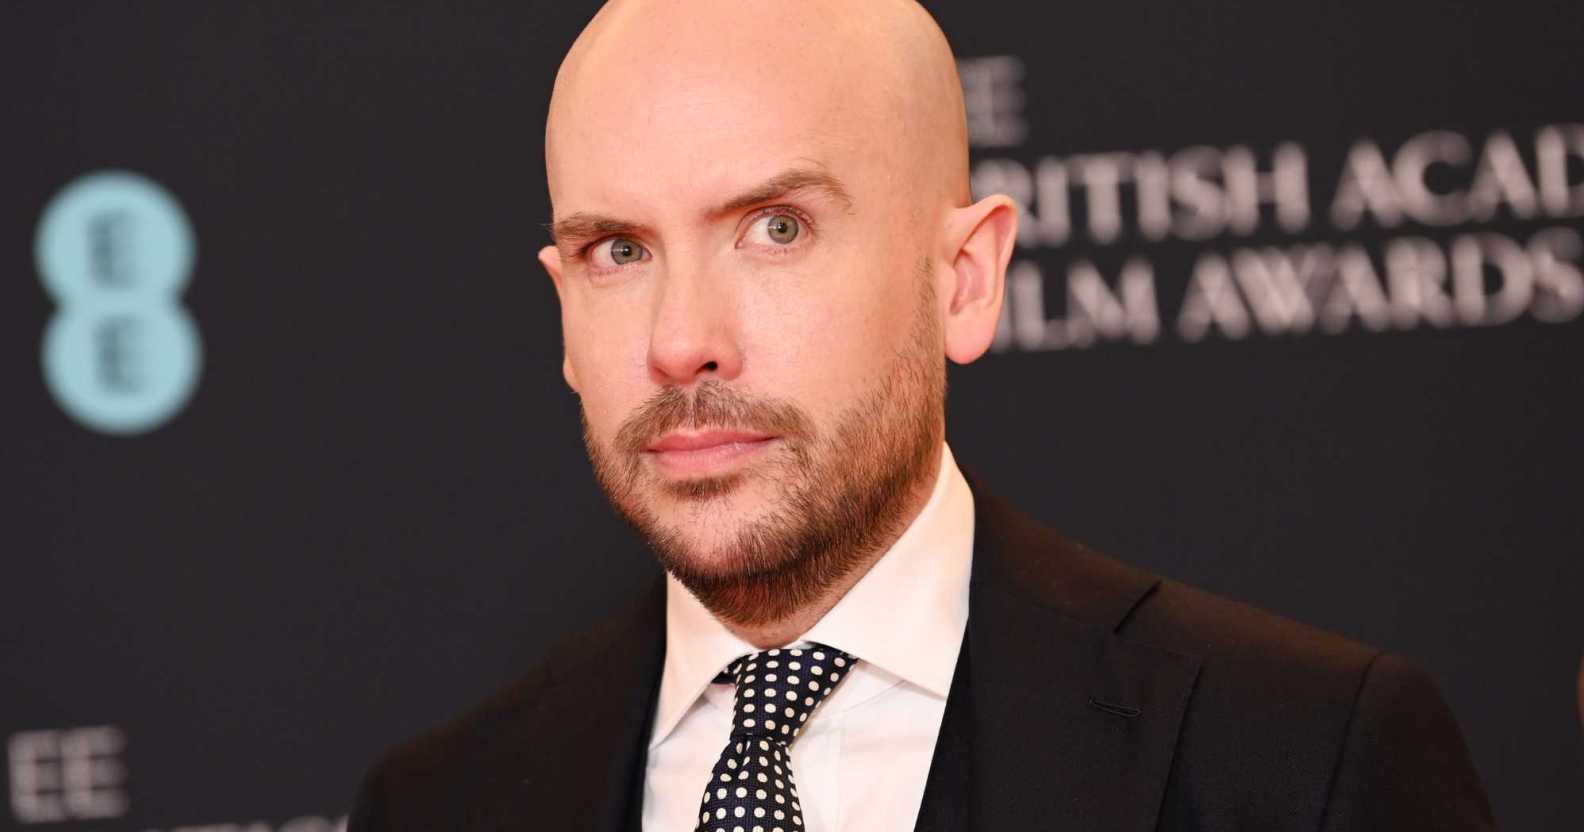 Tom Allen pictured on the red carpet at an event.